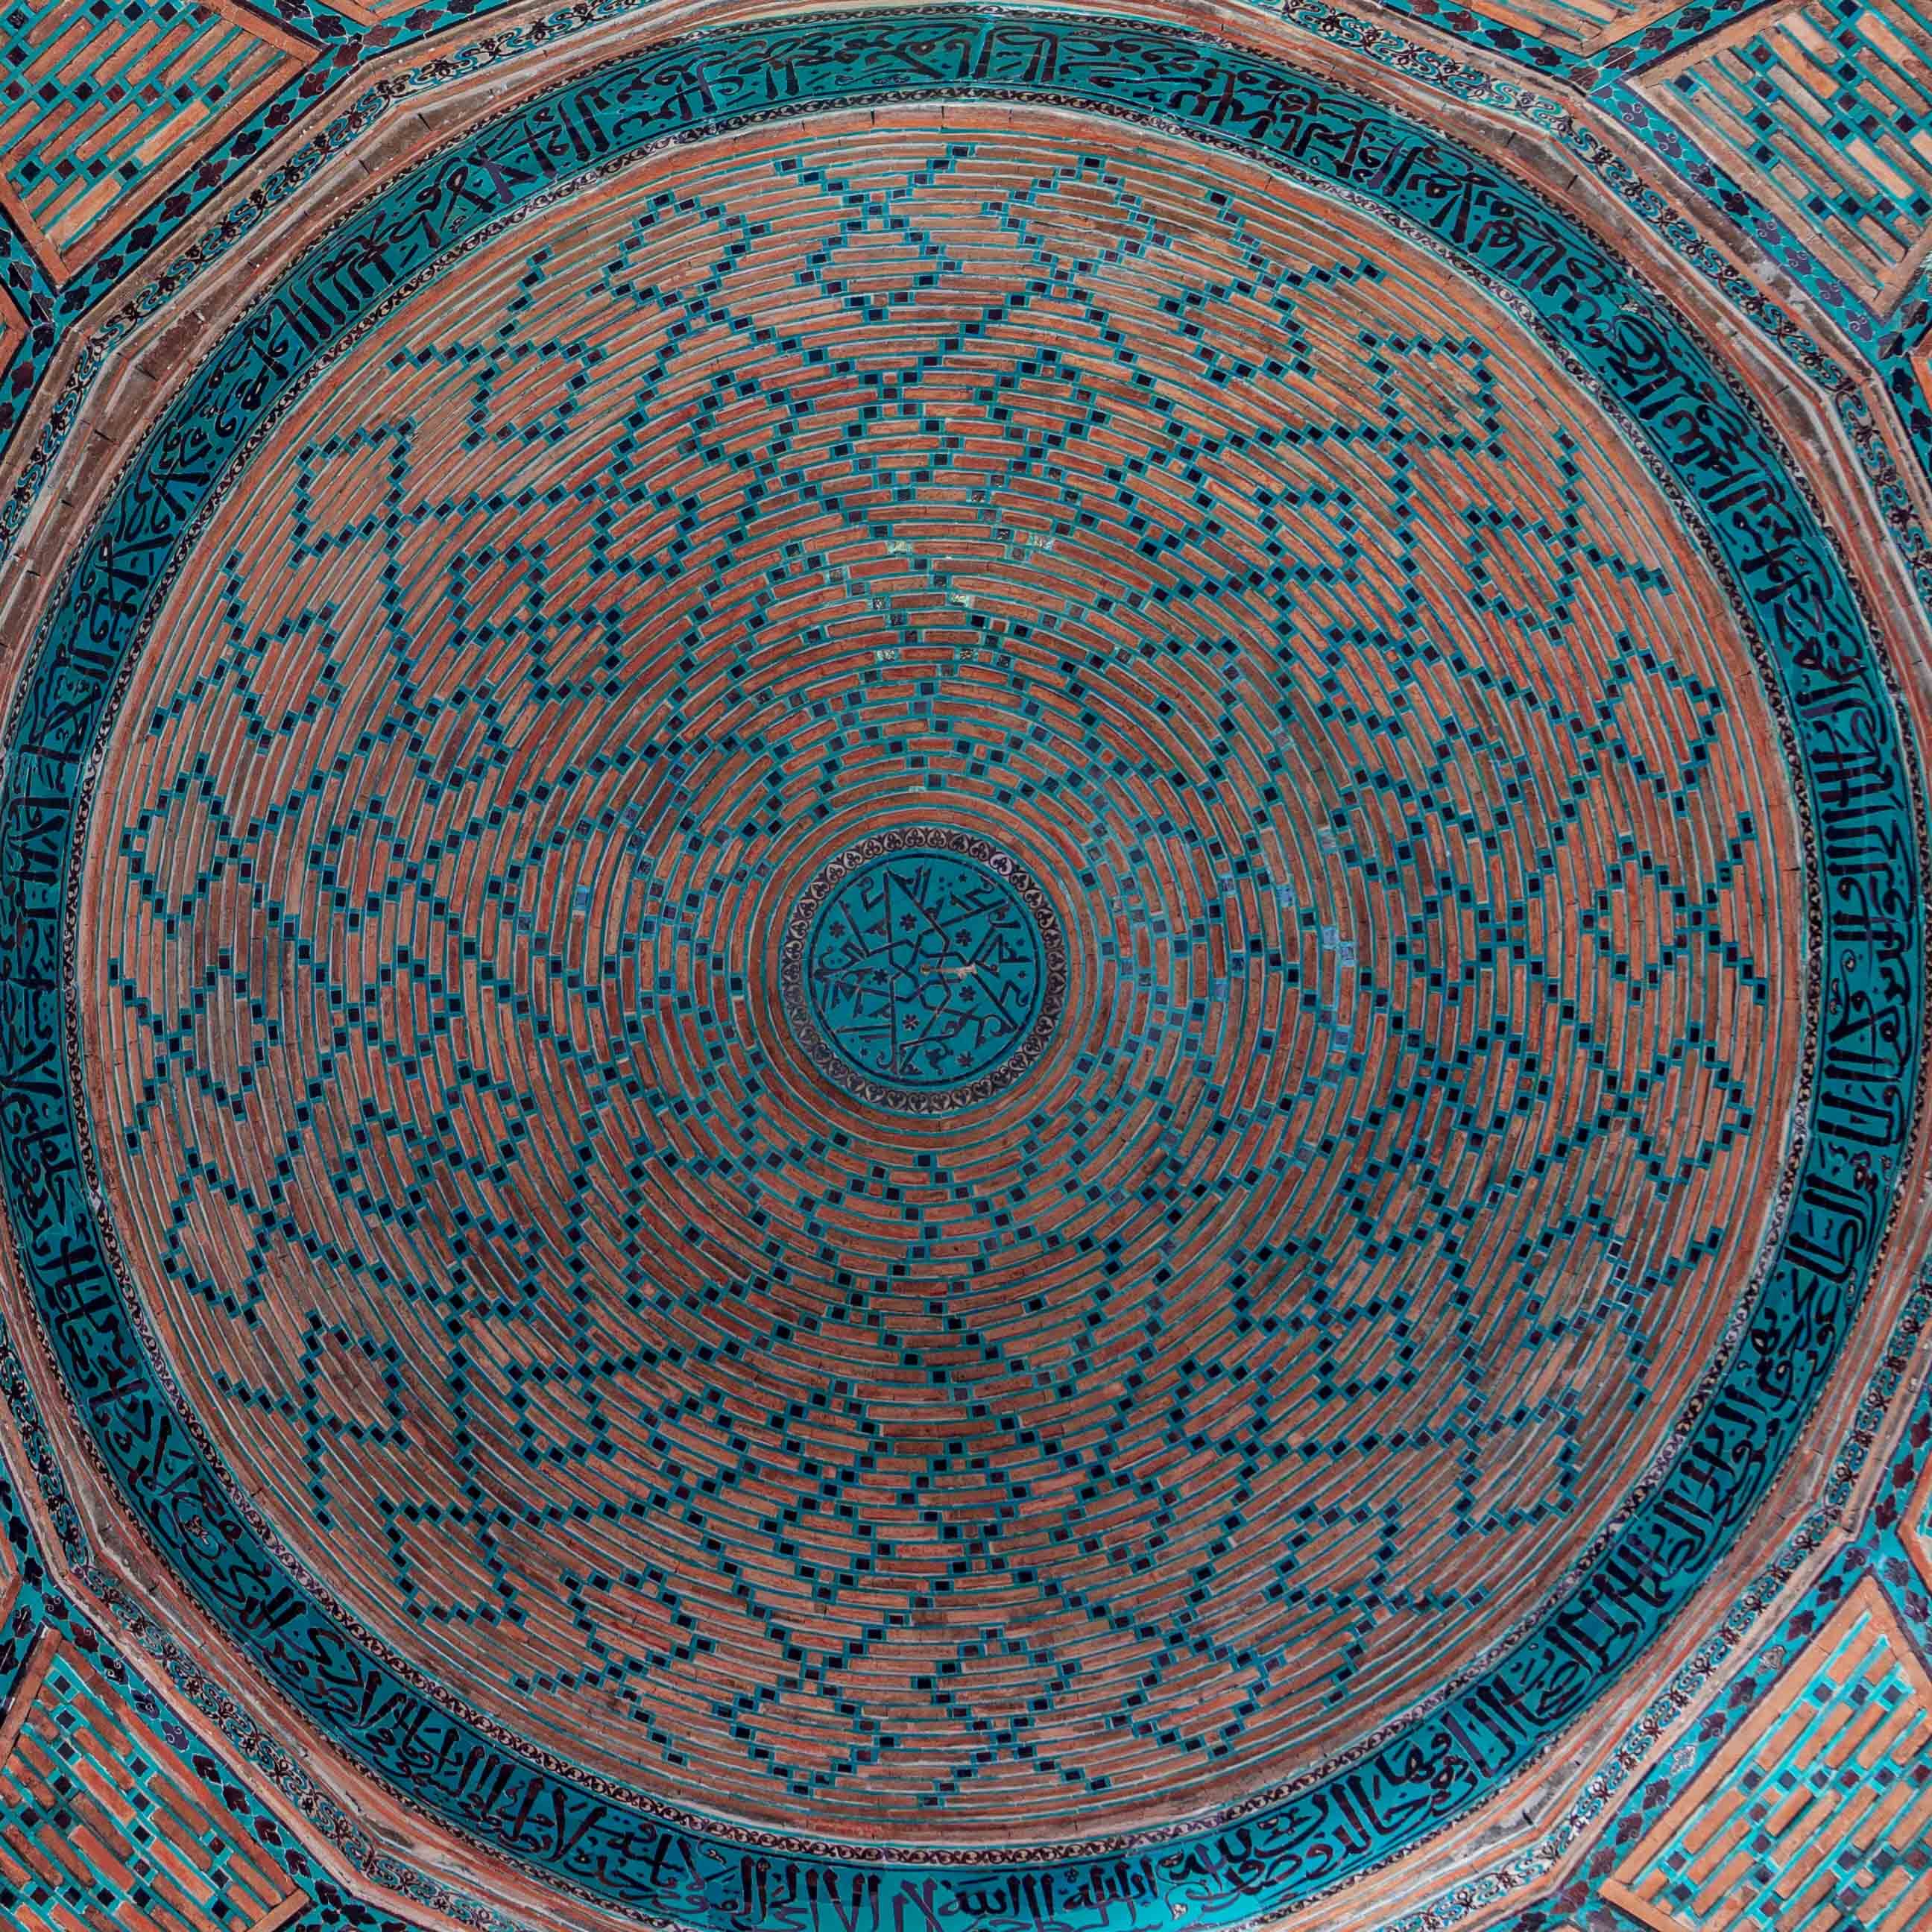 The dome of Beysehir Mosque with turquoise tiles as seen from inside 